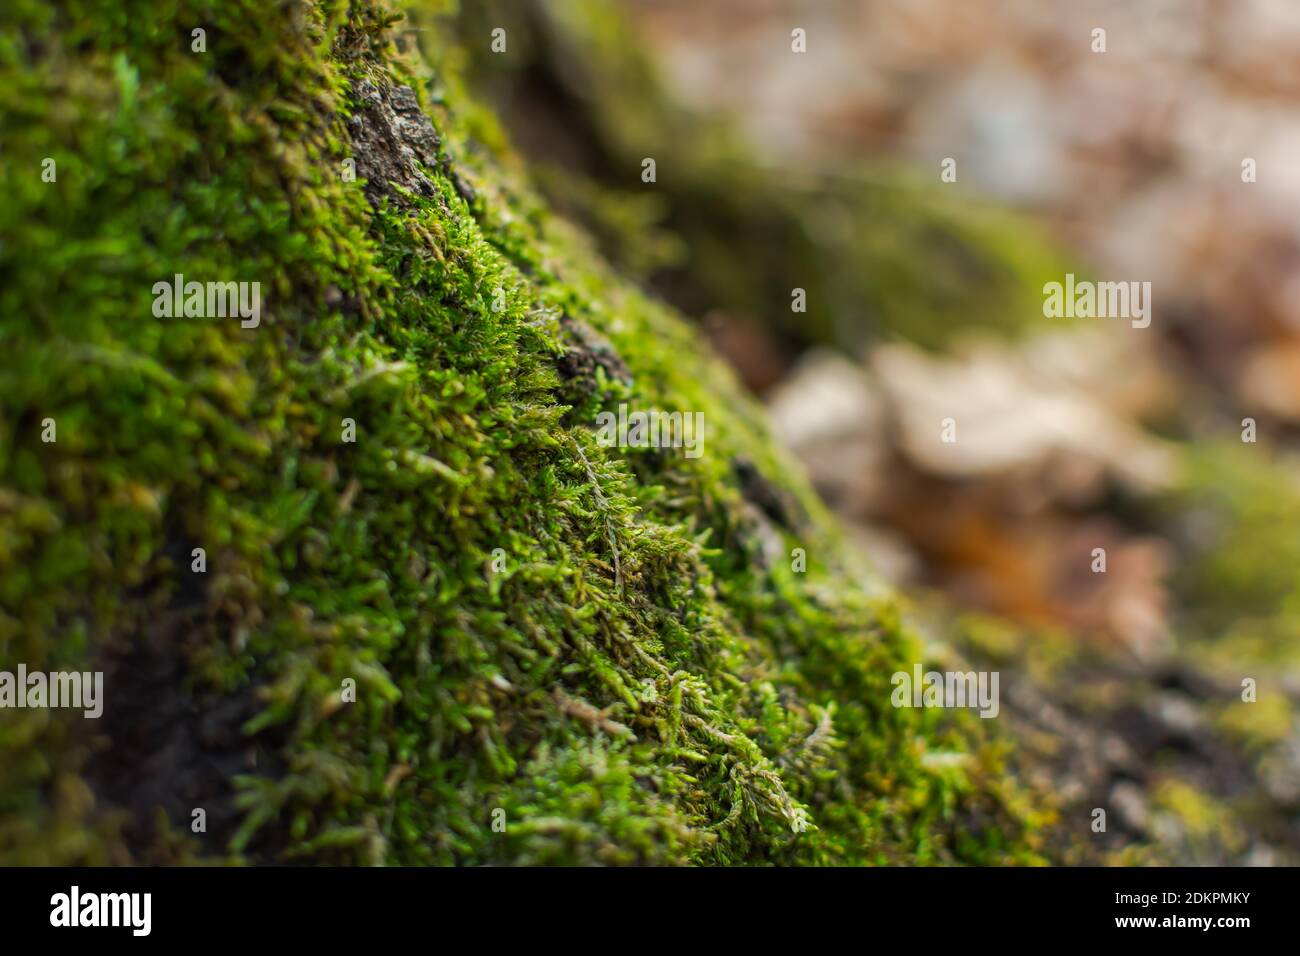 The texture of moss on a tree close-up. Natural green background. Soft focus, shallow depth of field, blurred forest background. varieties of tree mos Stock Photo